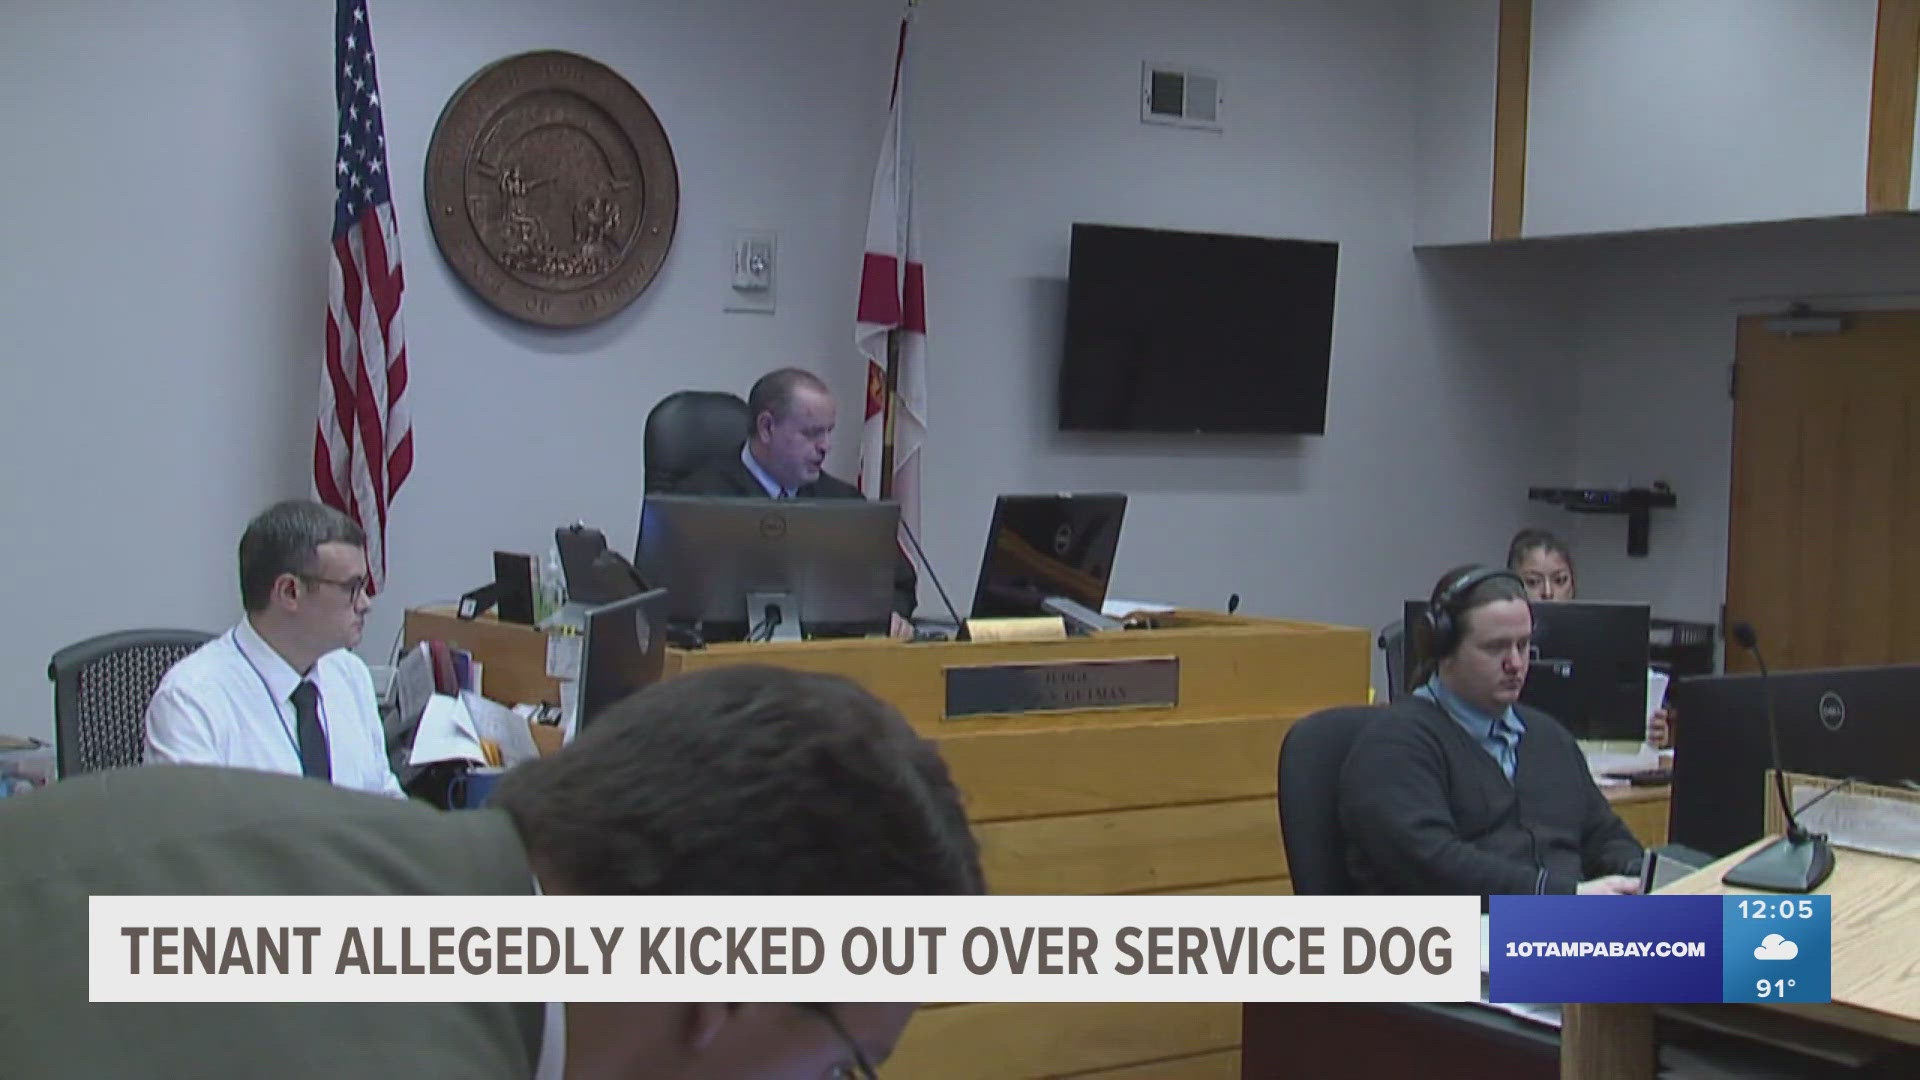 A Tampa Airbnb host is accused of kicking the tenant out. Florida law says service dogs must be allowed into lodging.